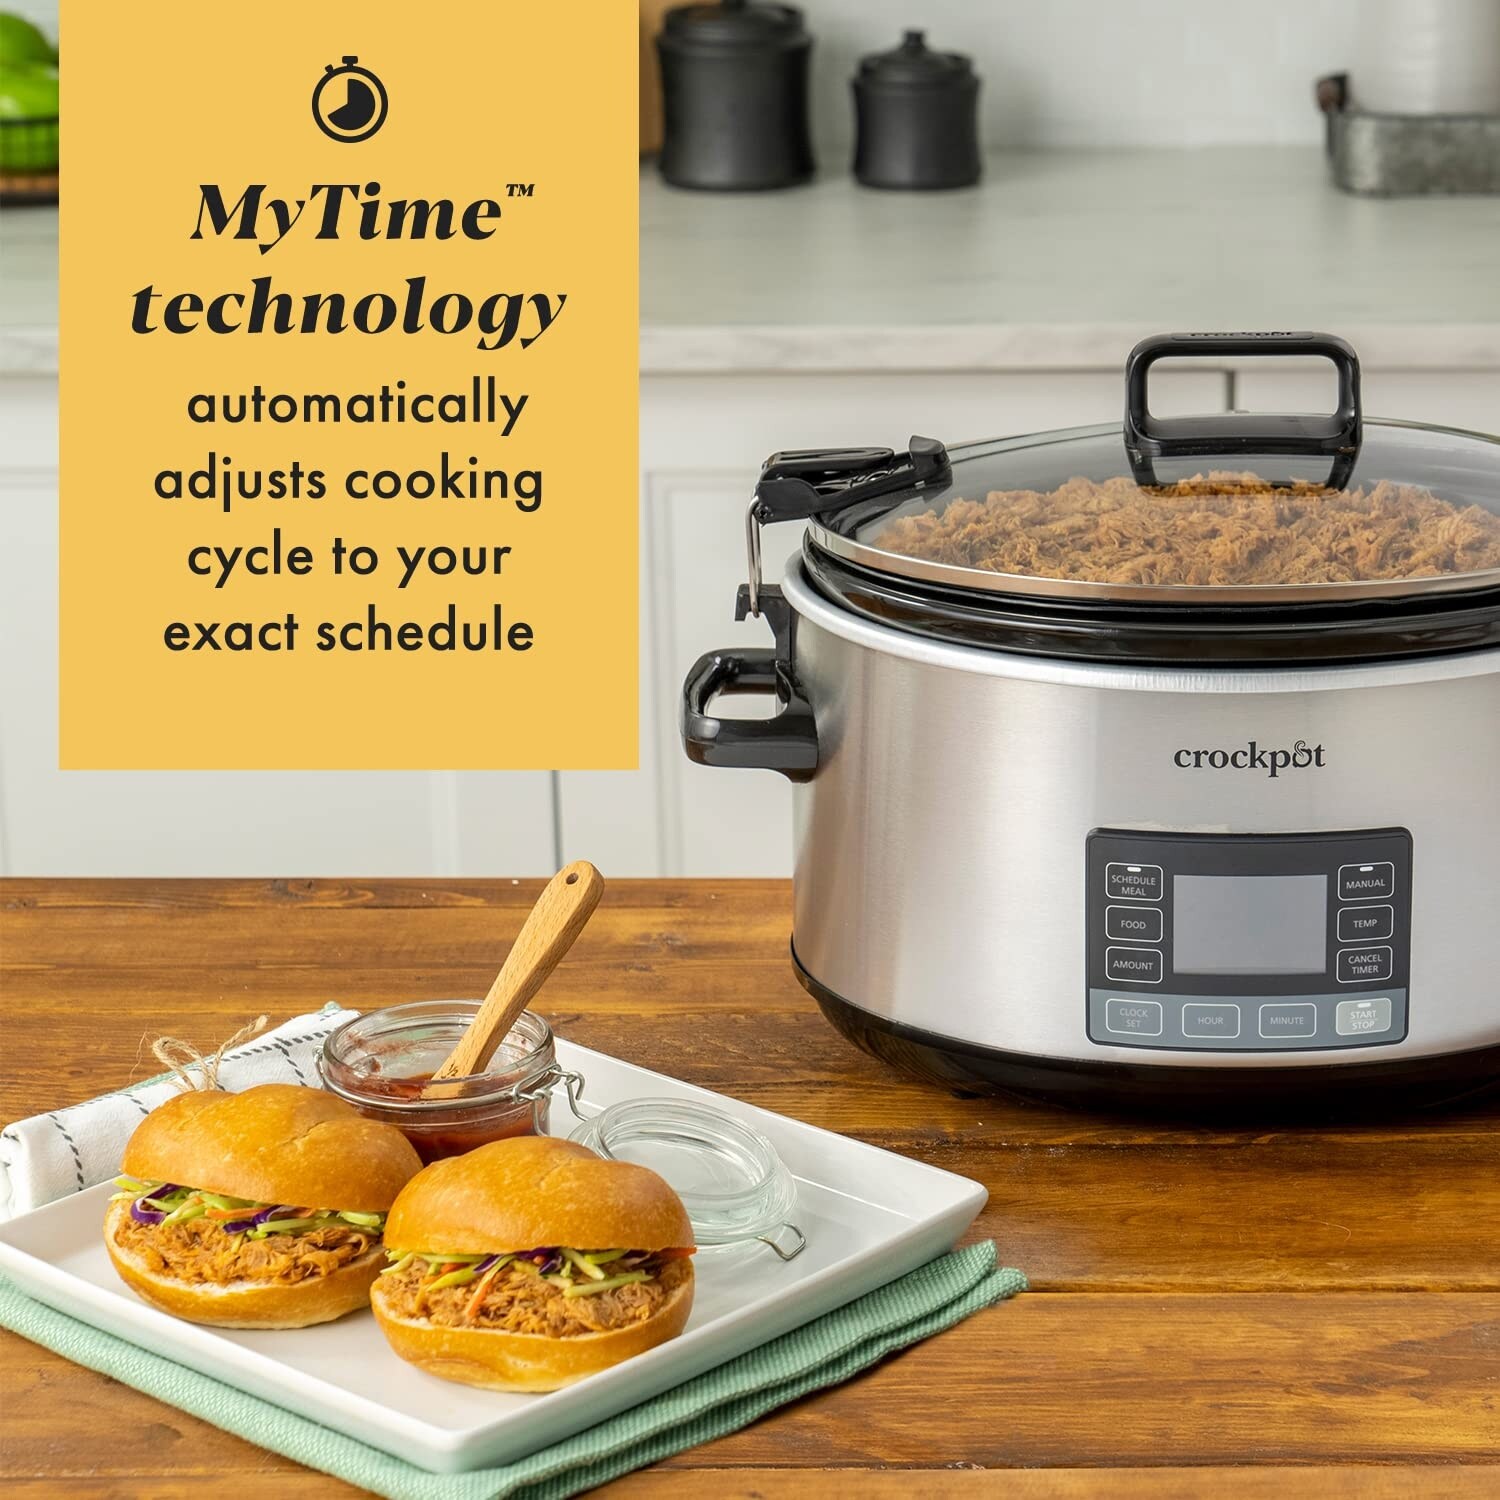 https://ak1.ostkcdn.com/images/products/is/images/direct/dac211d34a304587373c81811f8be97ae0f7b67a/7-Quart-Portable-Programmable-Slow-Cooker-with-Timer-and-Locking-Lid%2C-Stainless-Steel.jpg